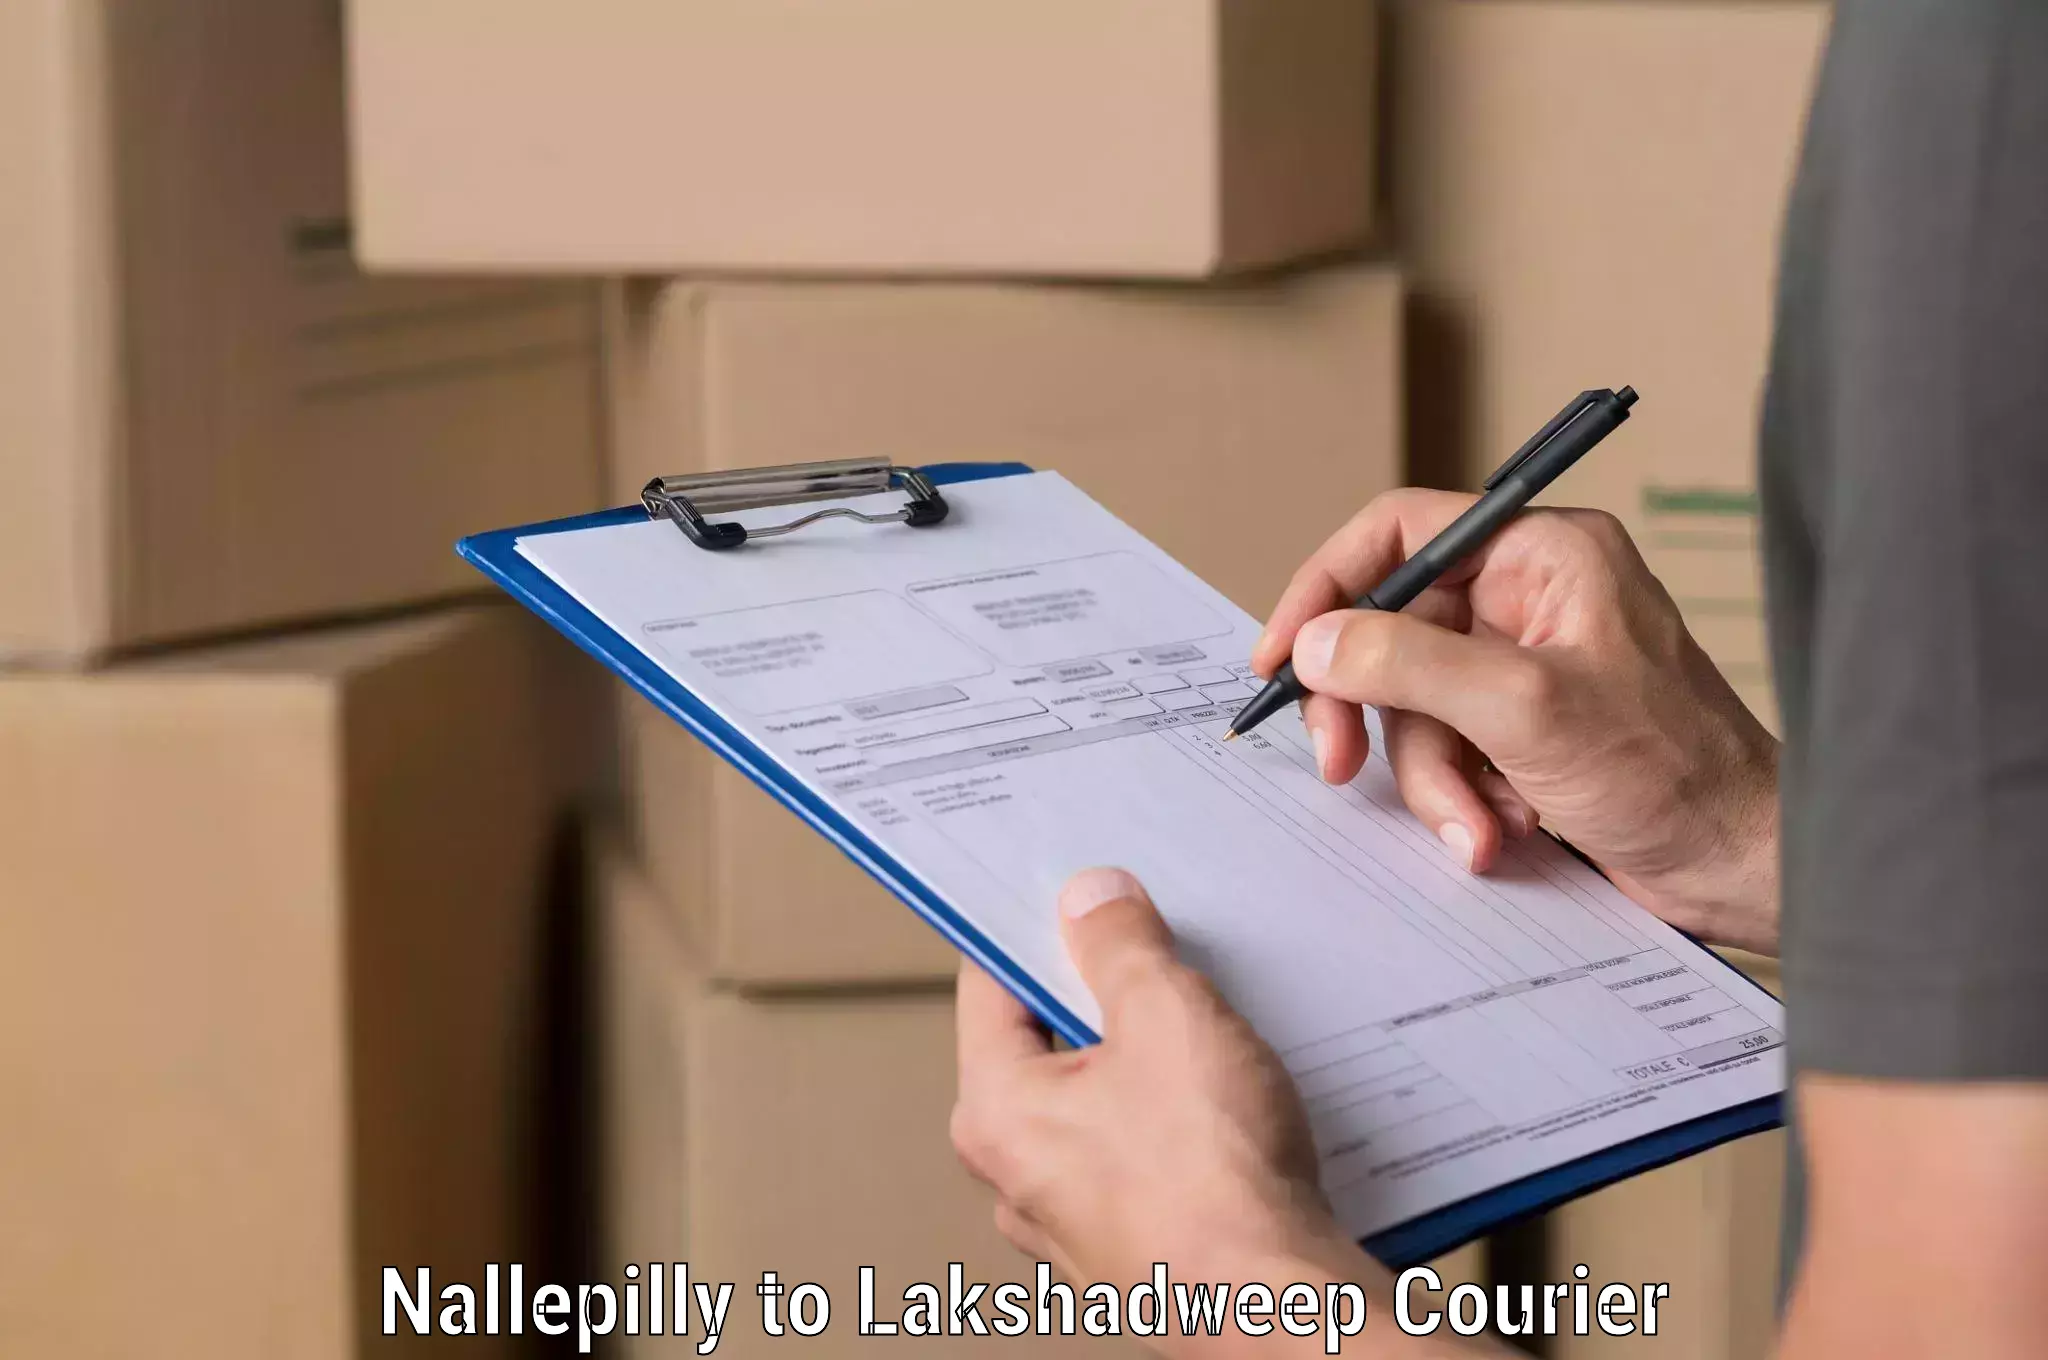 Express logistics providers Nallepilly to Lakshadweep